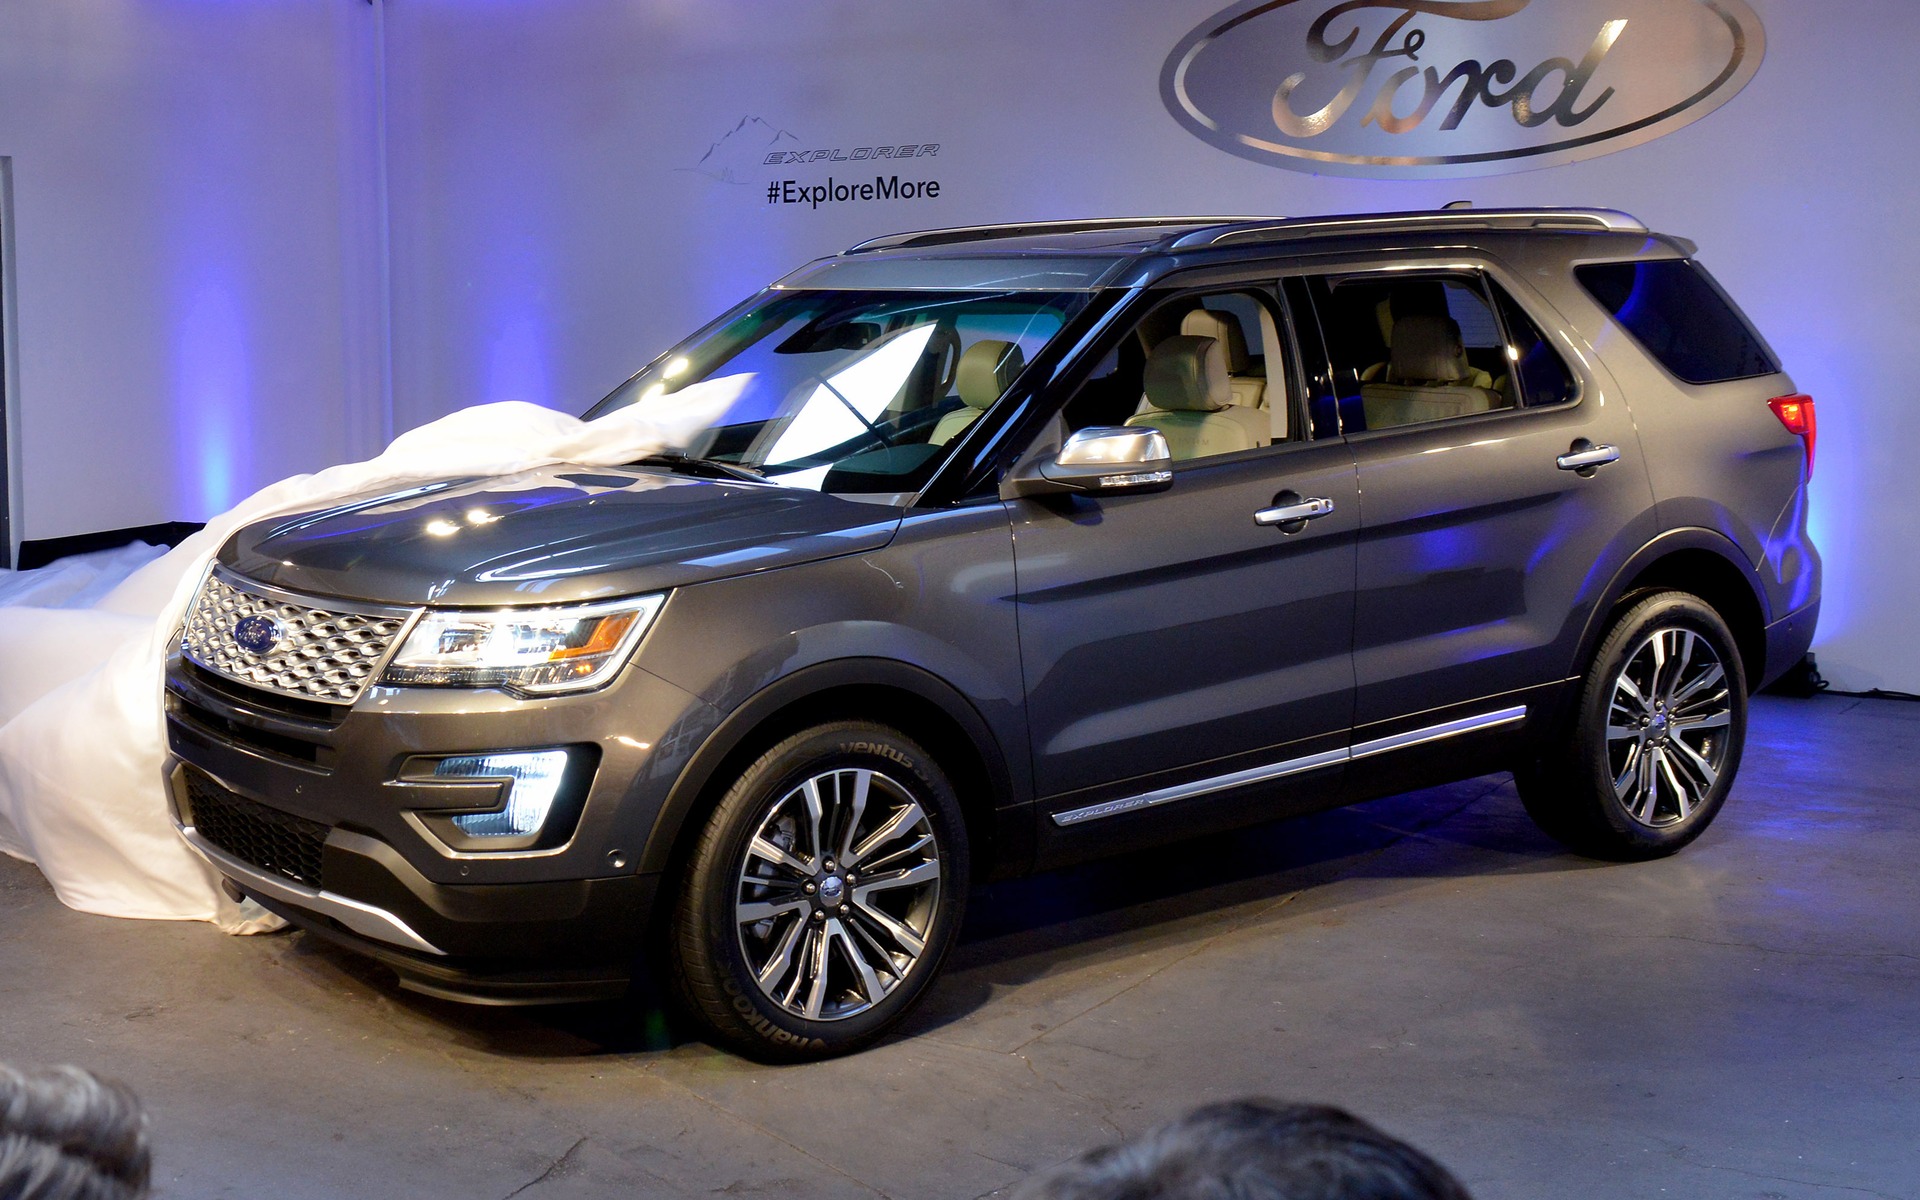 Difference between xls and xlt ford explorer #2